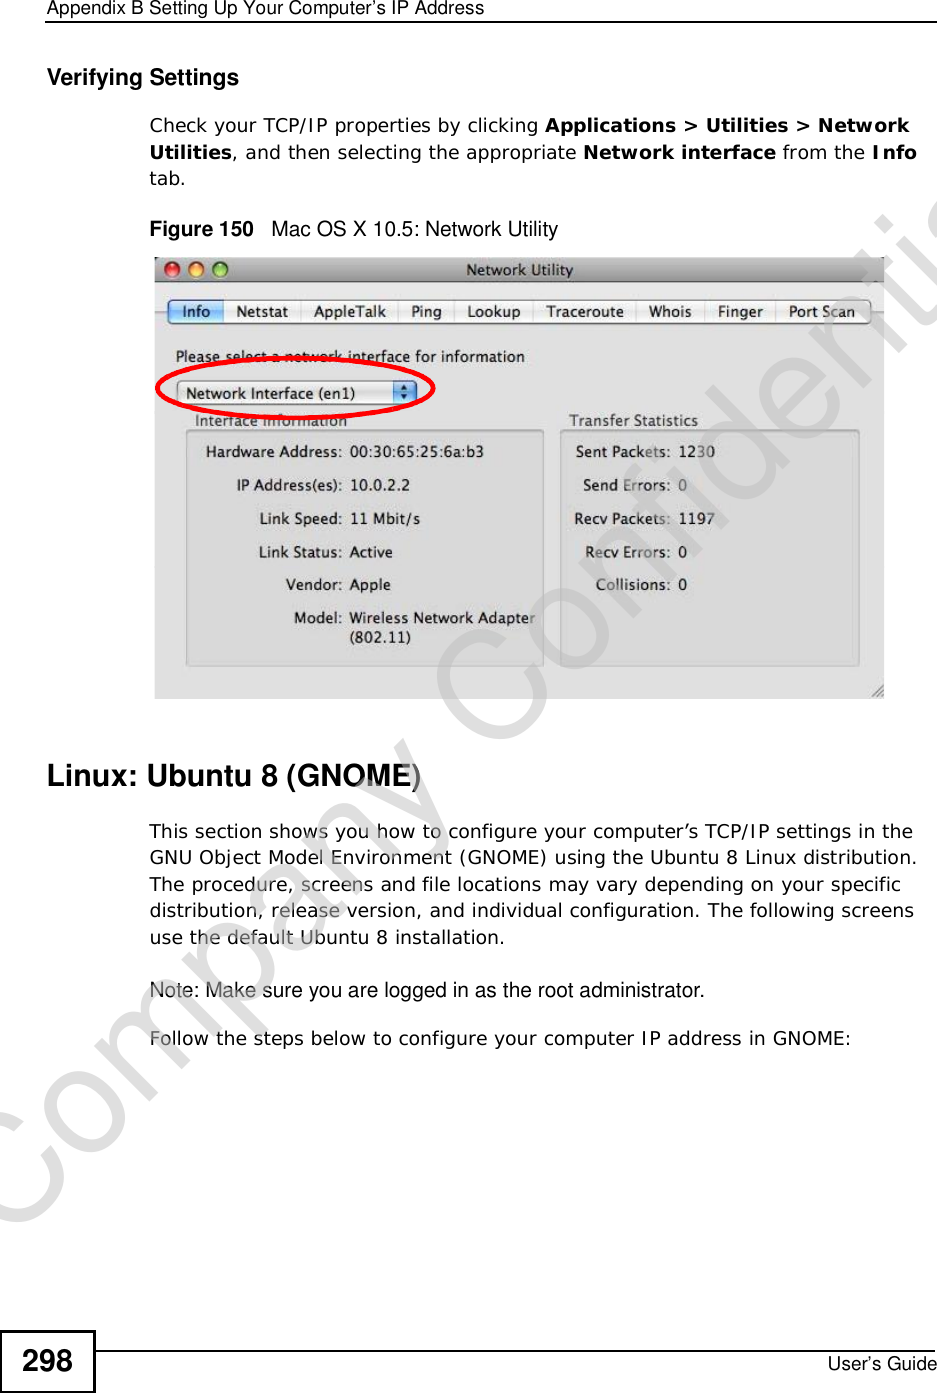 Appendix BSetting Up Your Computer’s IP AddressUser’s Guide298Verifying SettingsCheck your TCP/IP properties by clicking Applications &gt; Utilities &gt; Network Utilities, and then selecting the appropriate Network interface from the Infotab.Figure 150   Mac OS X 10.5: Network UtilityLinux: Ubuntu 8 (GNOME)This section shows you how to configure your computer’s TCP/IP settings in the GNU Object Model Environment (GNOME) using the Ubuntu 8 Linux distribution. The procedure, screens and file locations may vary depending on your specific distribution, release version, and individual configuration. The following screens use the default Ubuntu 8 installation.Note: Make sure you are logged in as the root administrator. Follow the steps below to configure your computer IP address in GNOME: Company Confidential